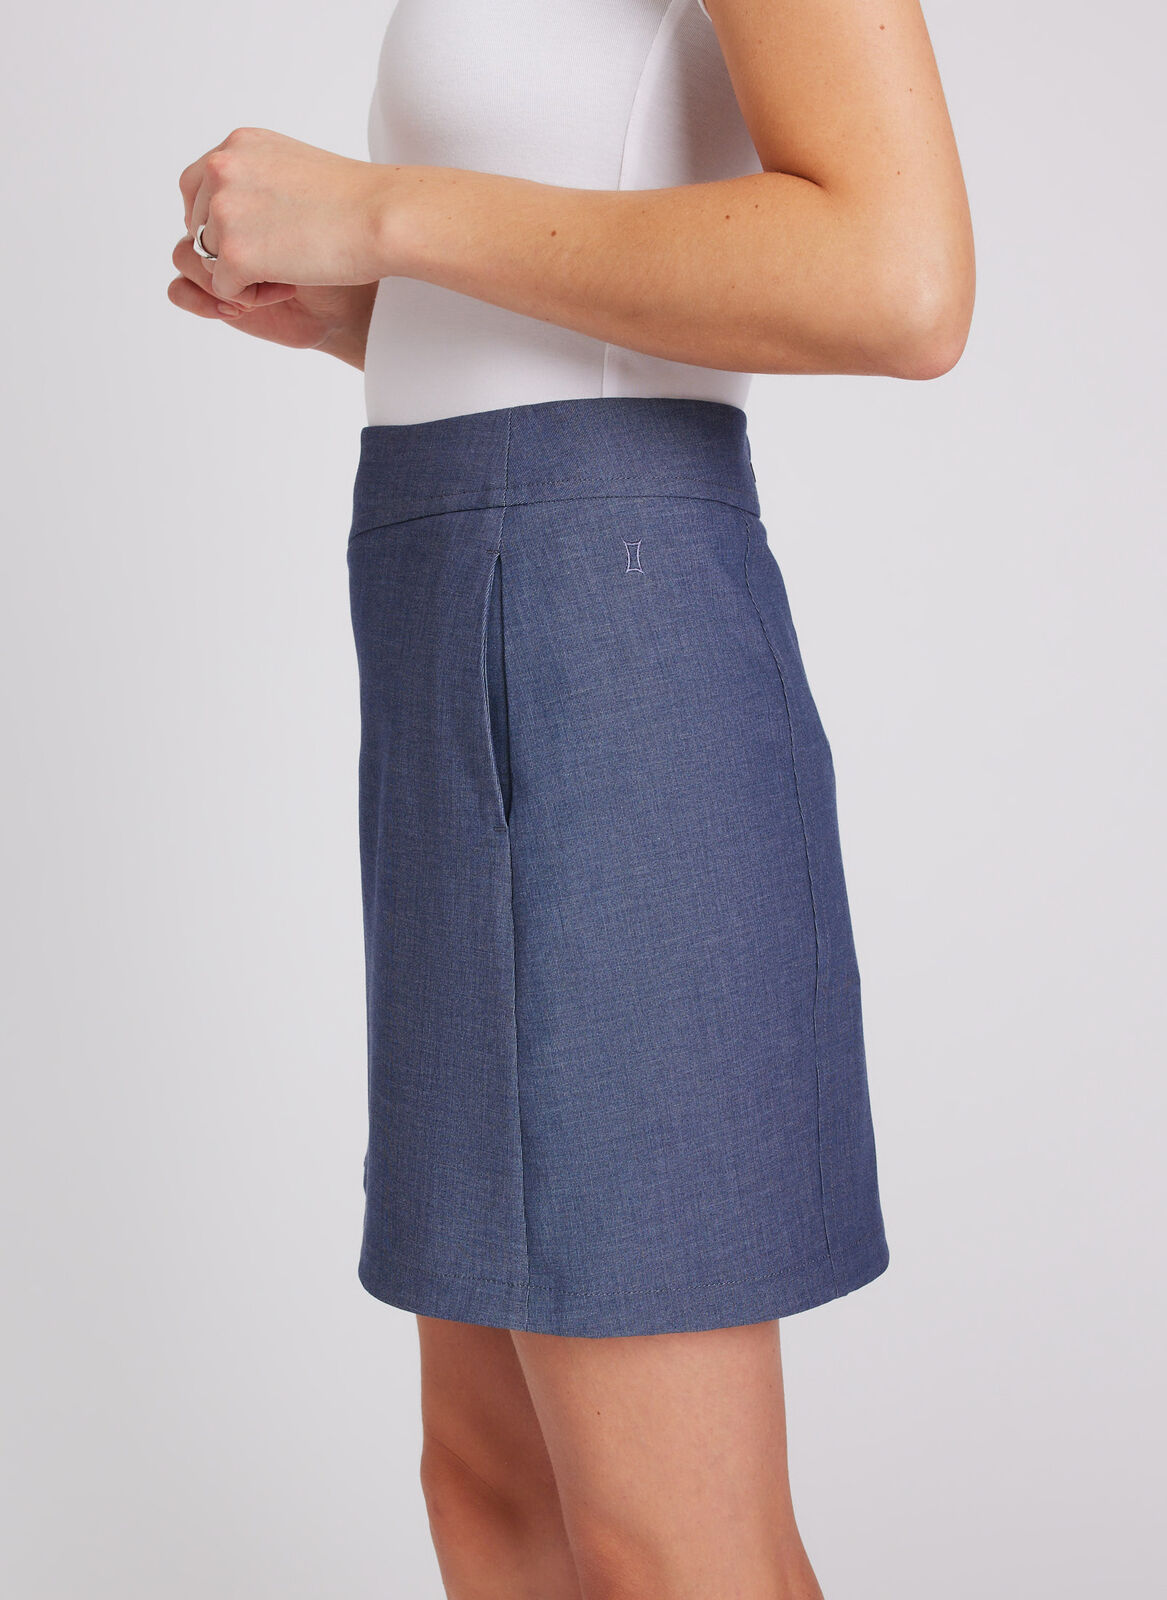 Seymour Short Skirt | Women's Shorts and Skirts – Kit and Ace